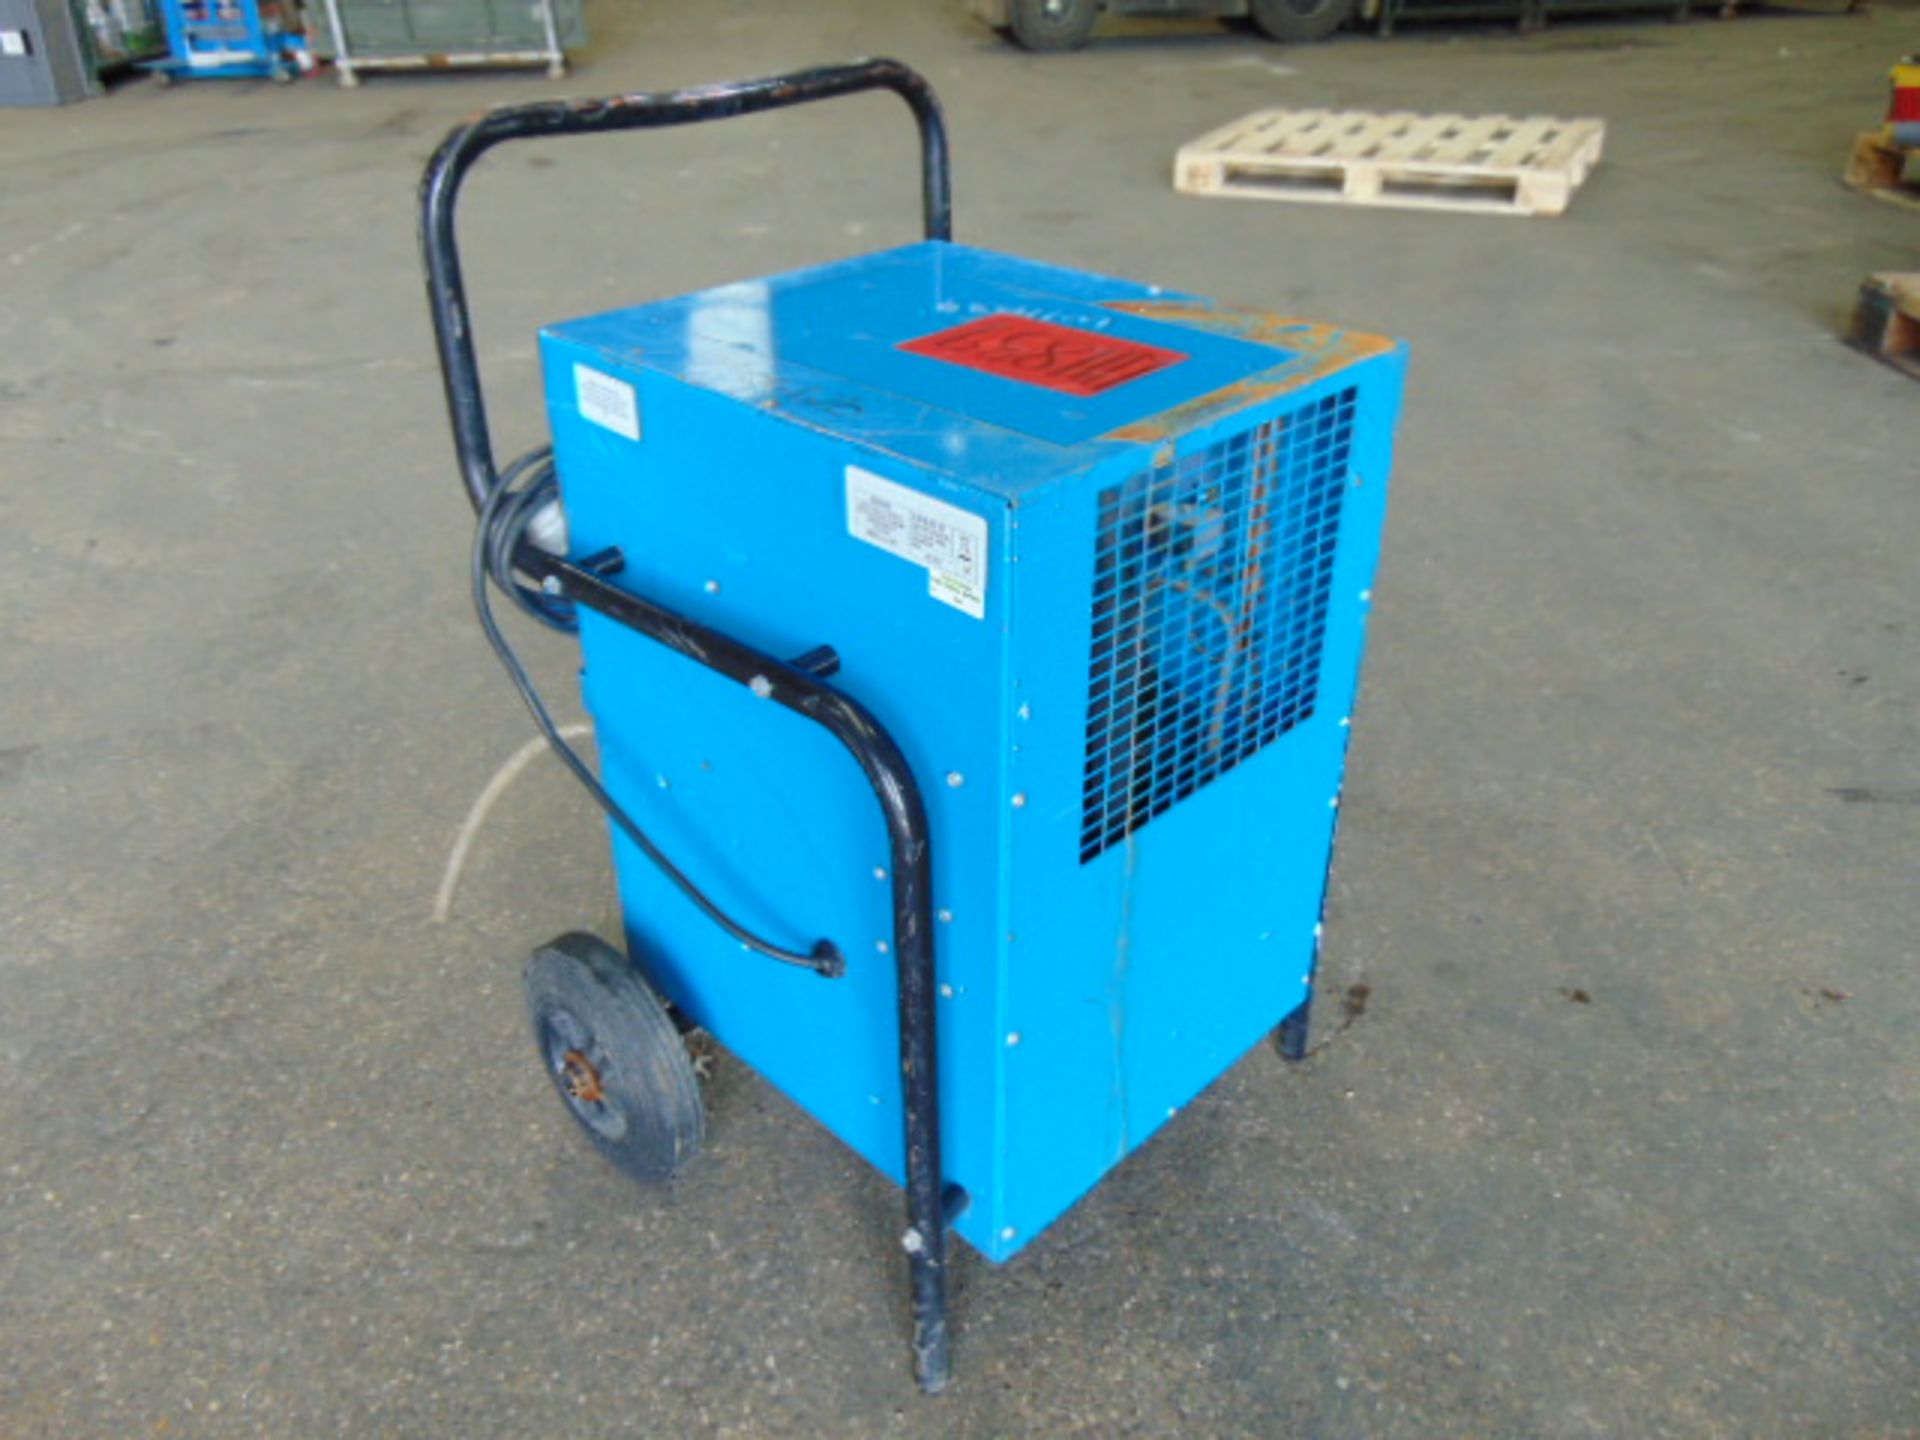 Broughton CR70 Industrial Mobile Dehumidifier - Image 2 of 4